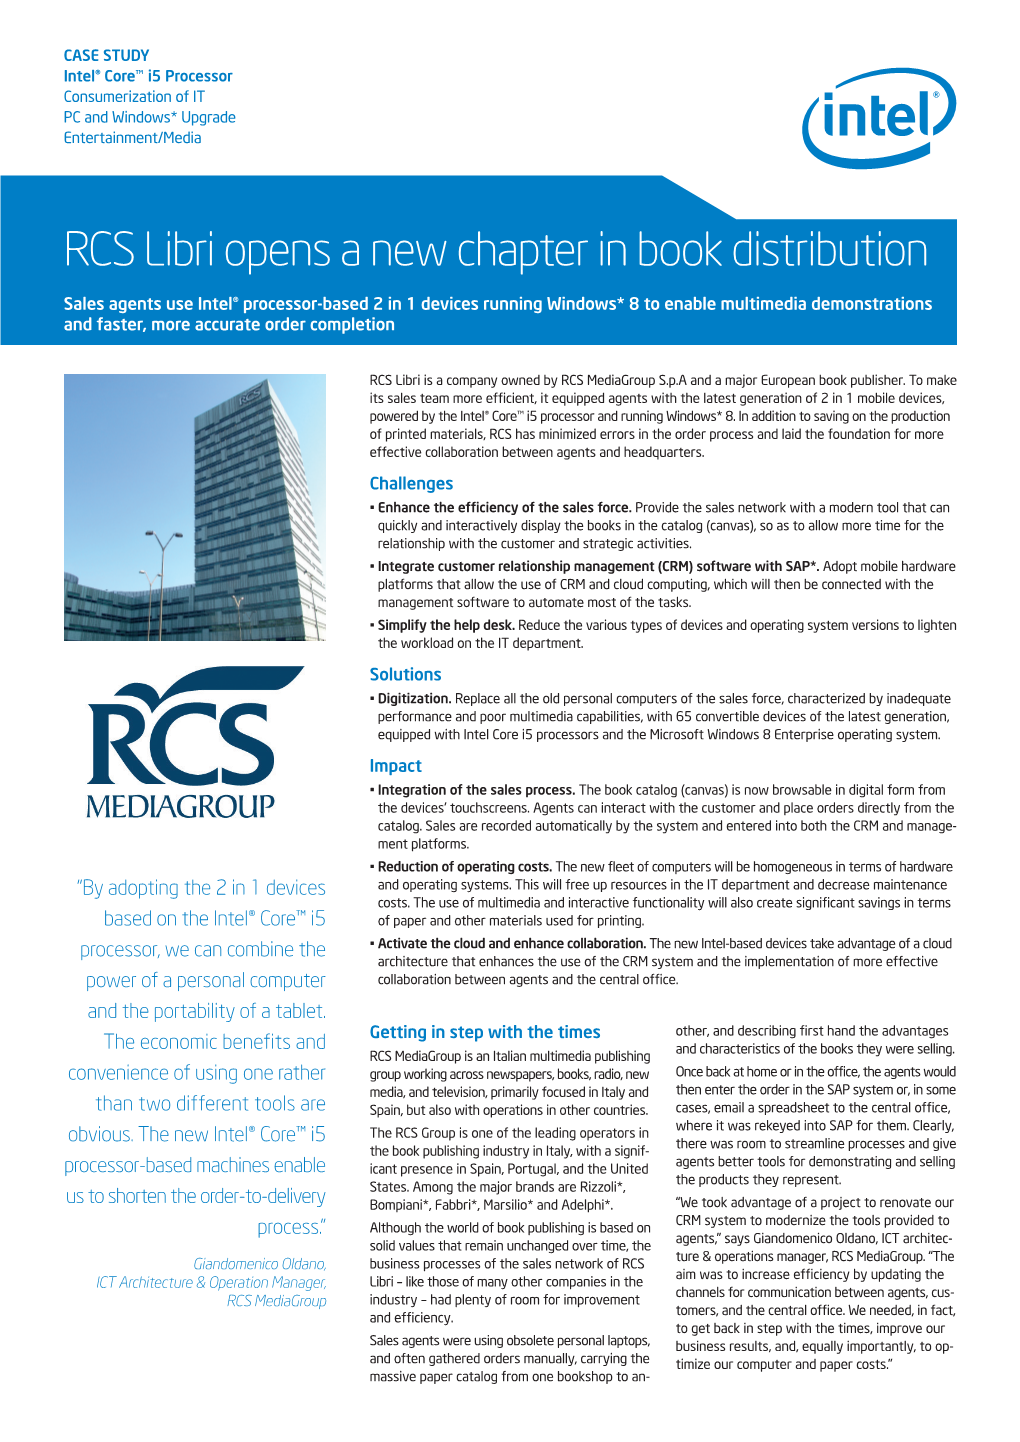 RCS Libri Opens a New Chapter in Book Distribution